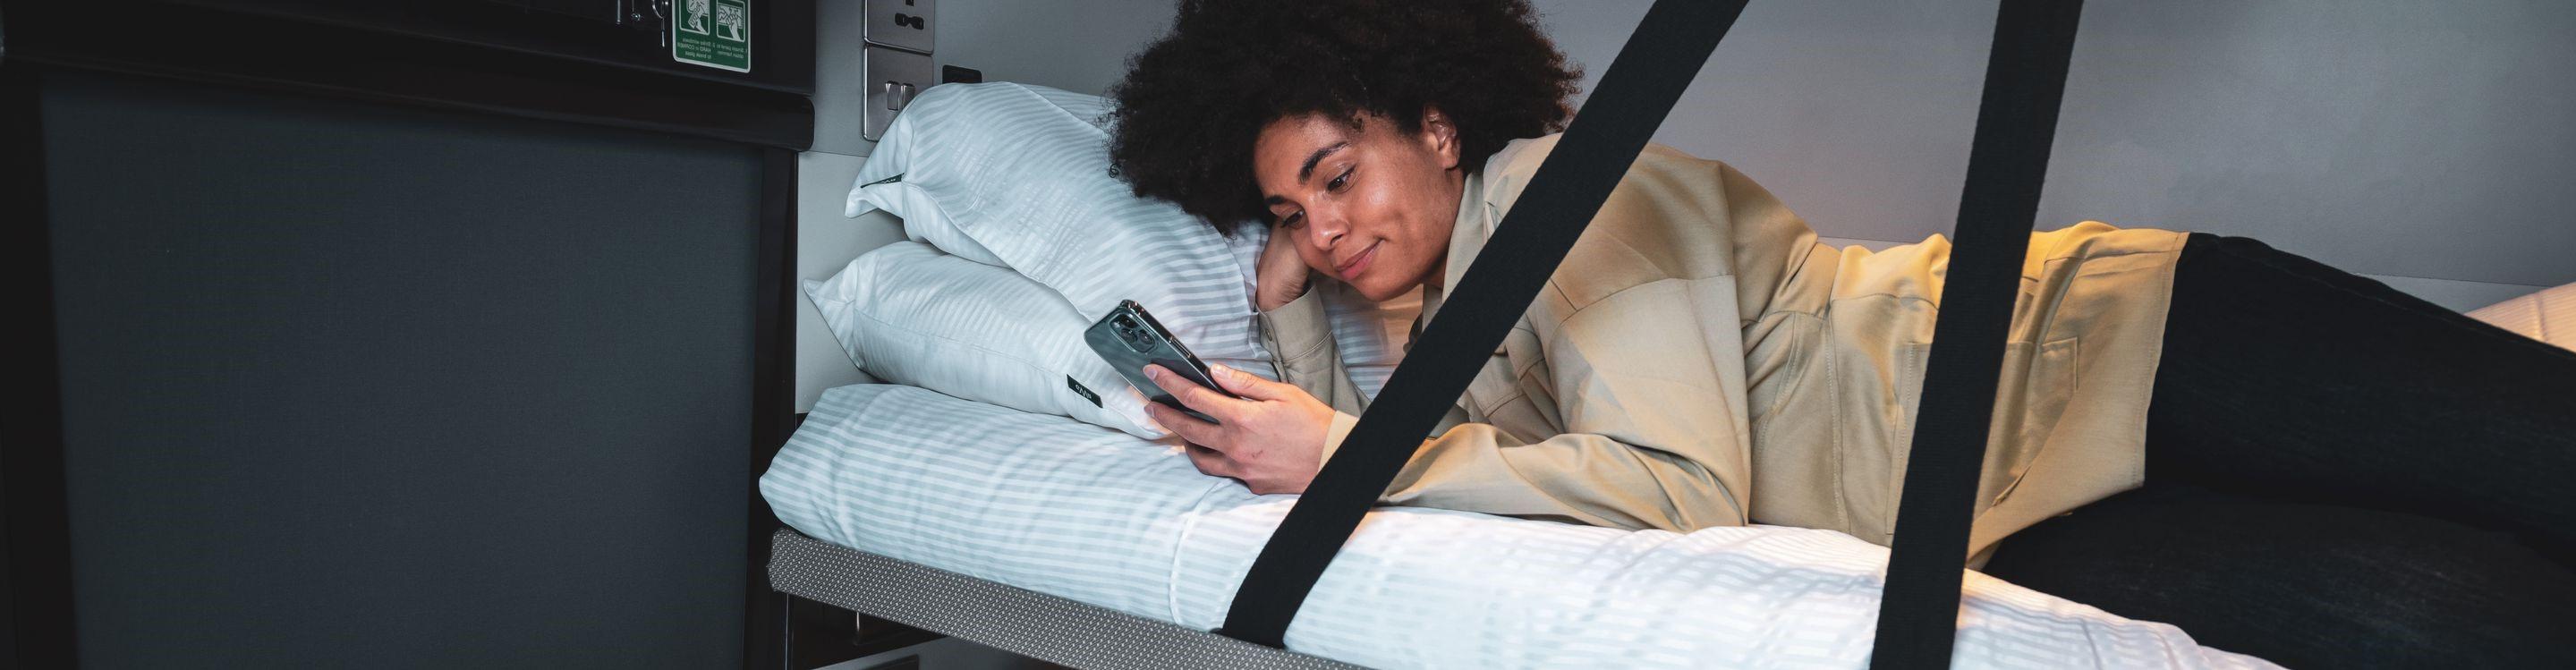 Photograph of a woman on a sleeper service looking at a smart phone 